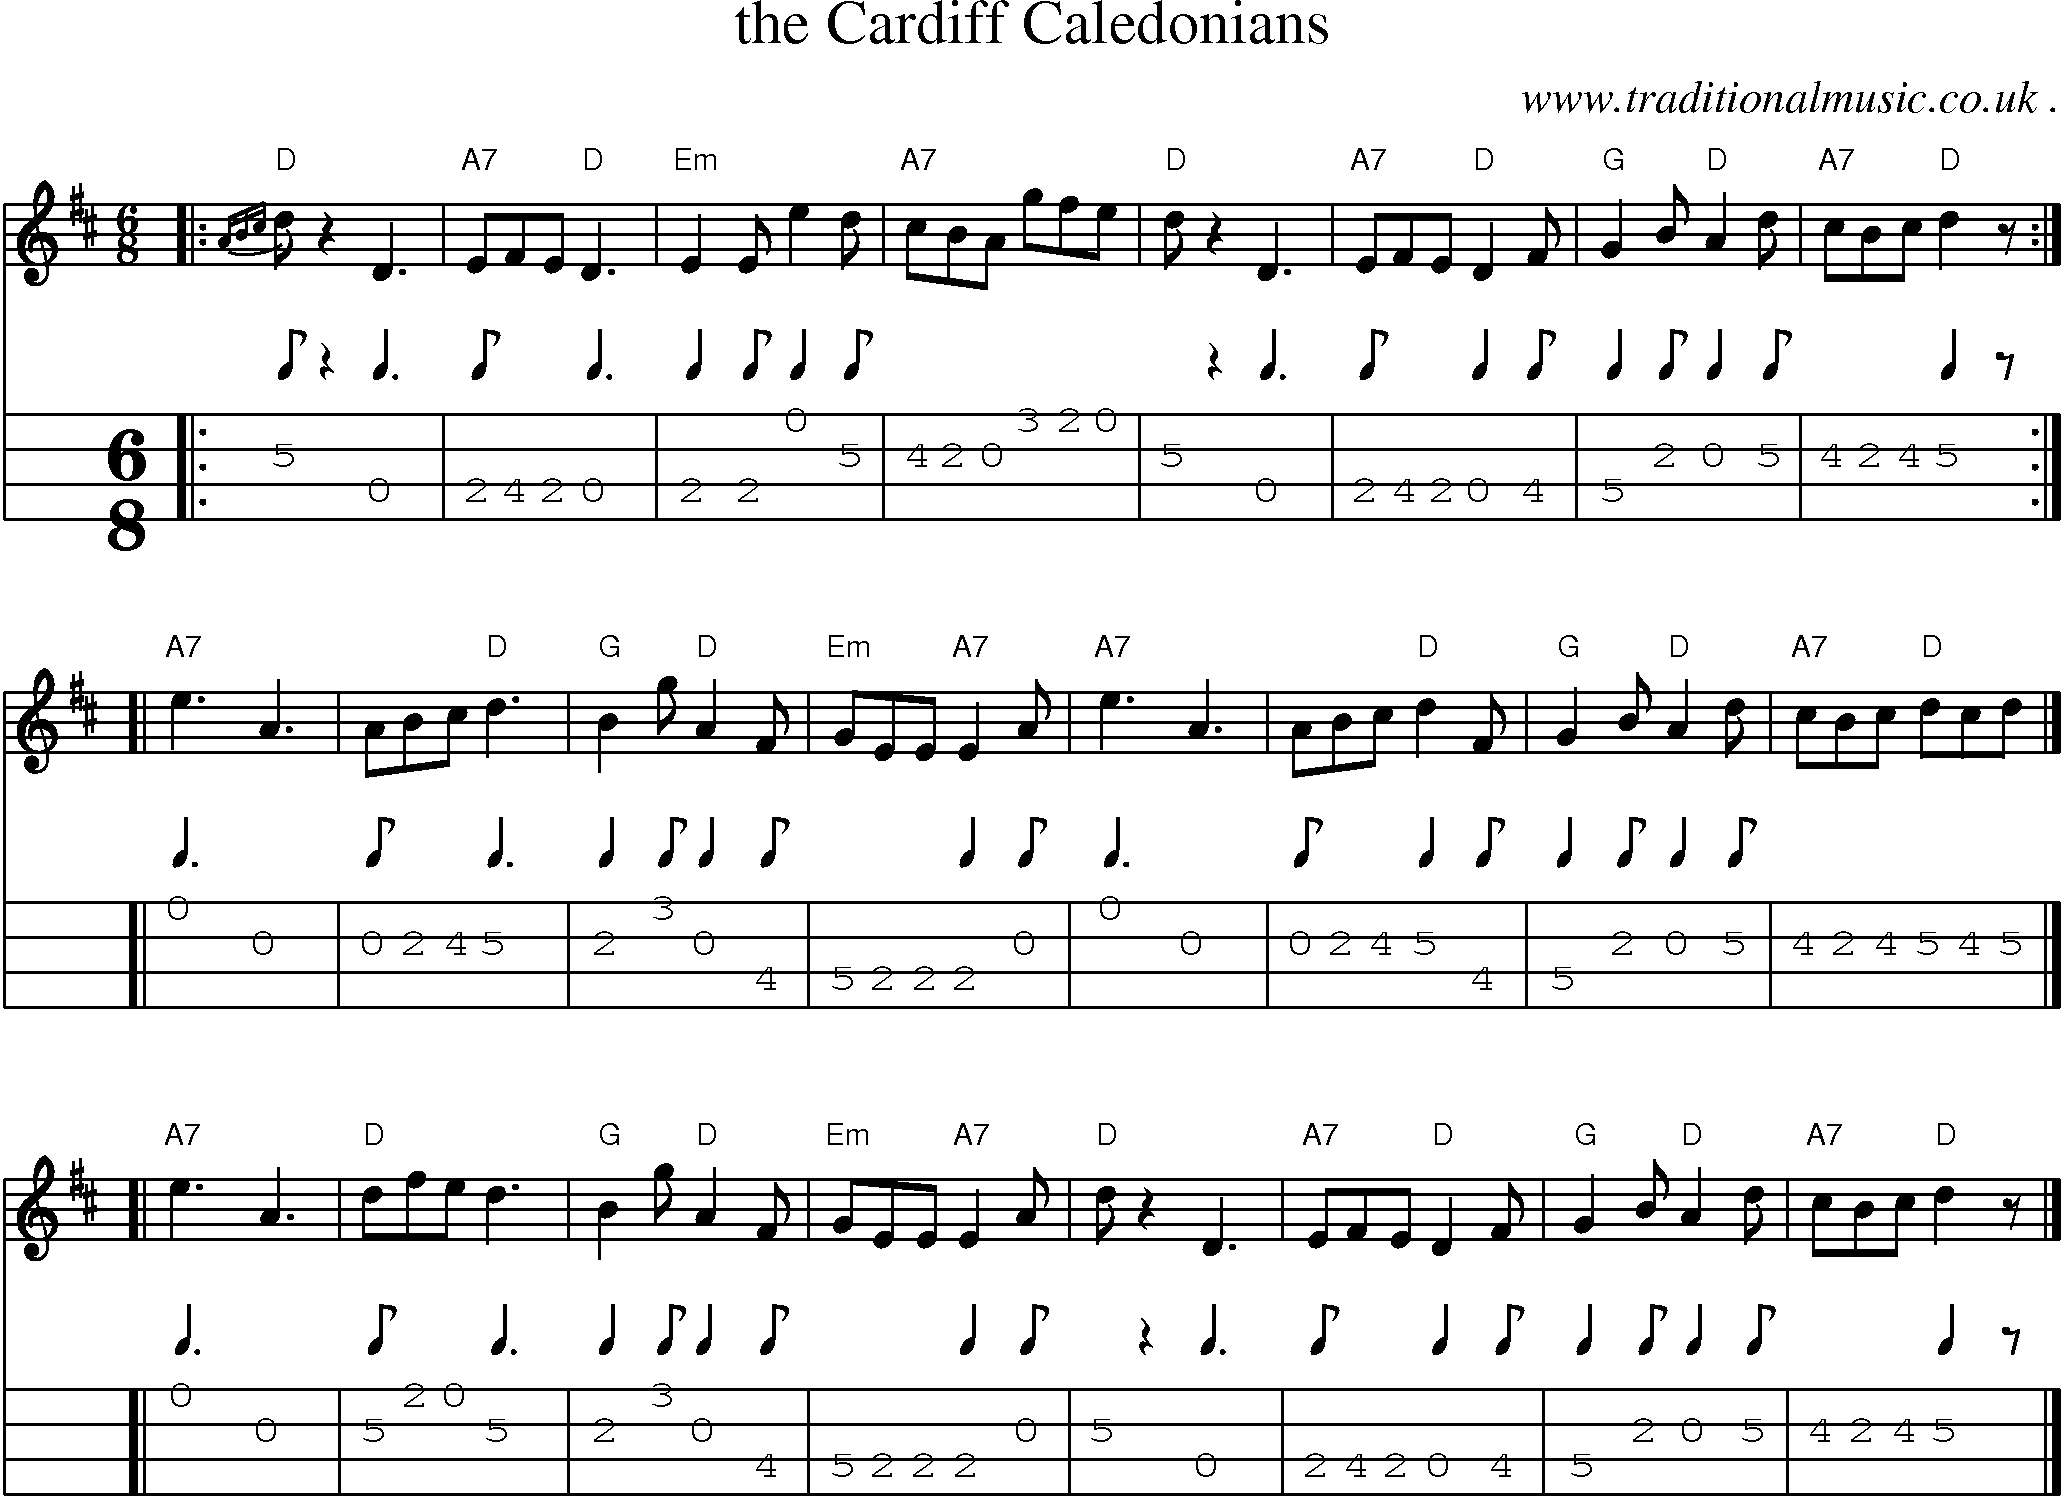 Sheet-music  score, Chords and Mandolin Tabs for The Cardiff Caledonians